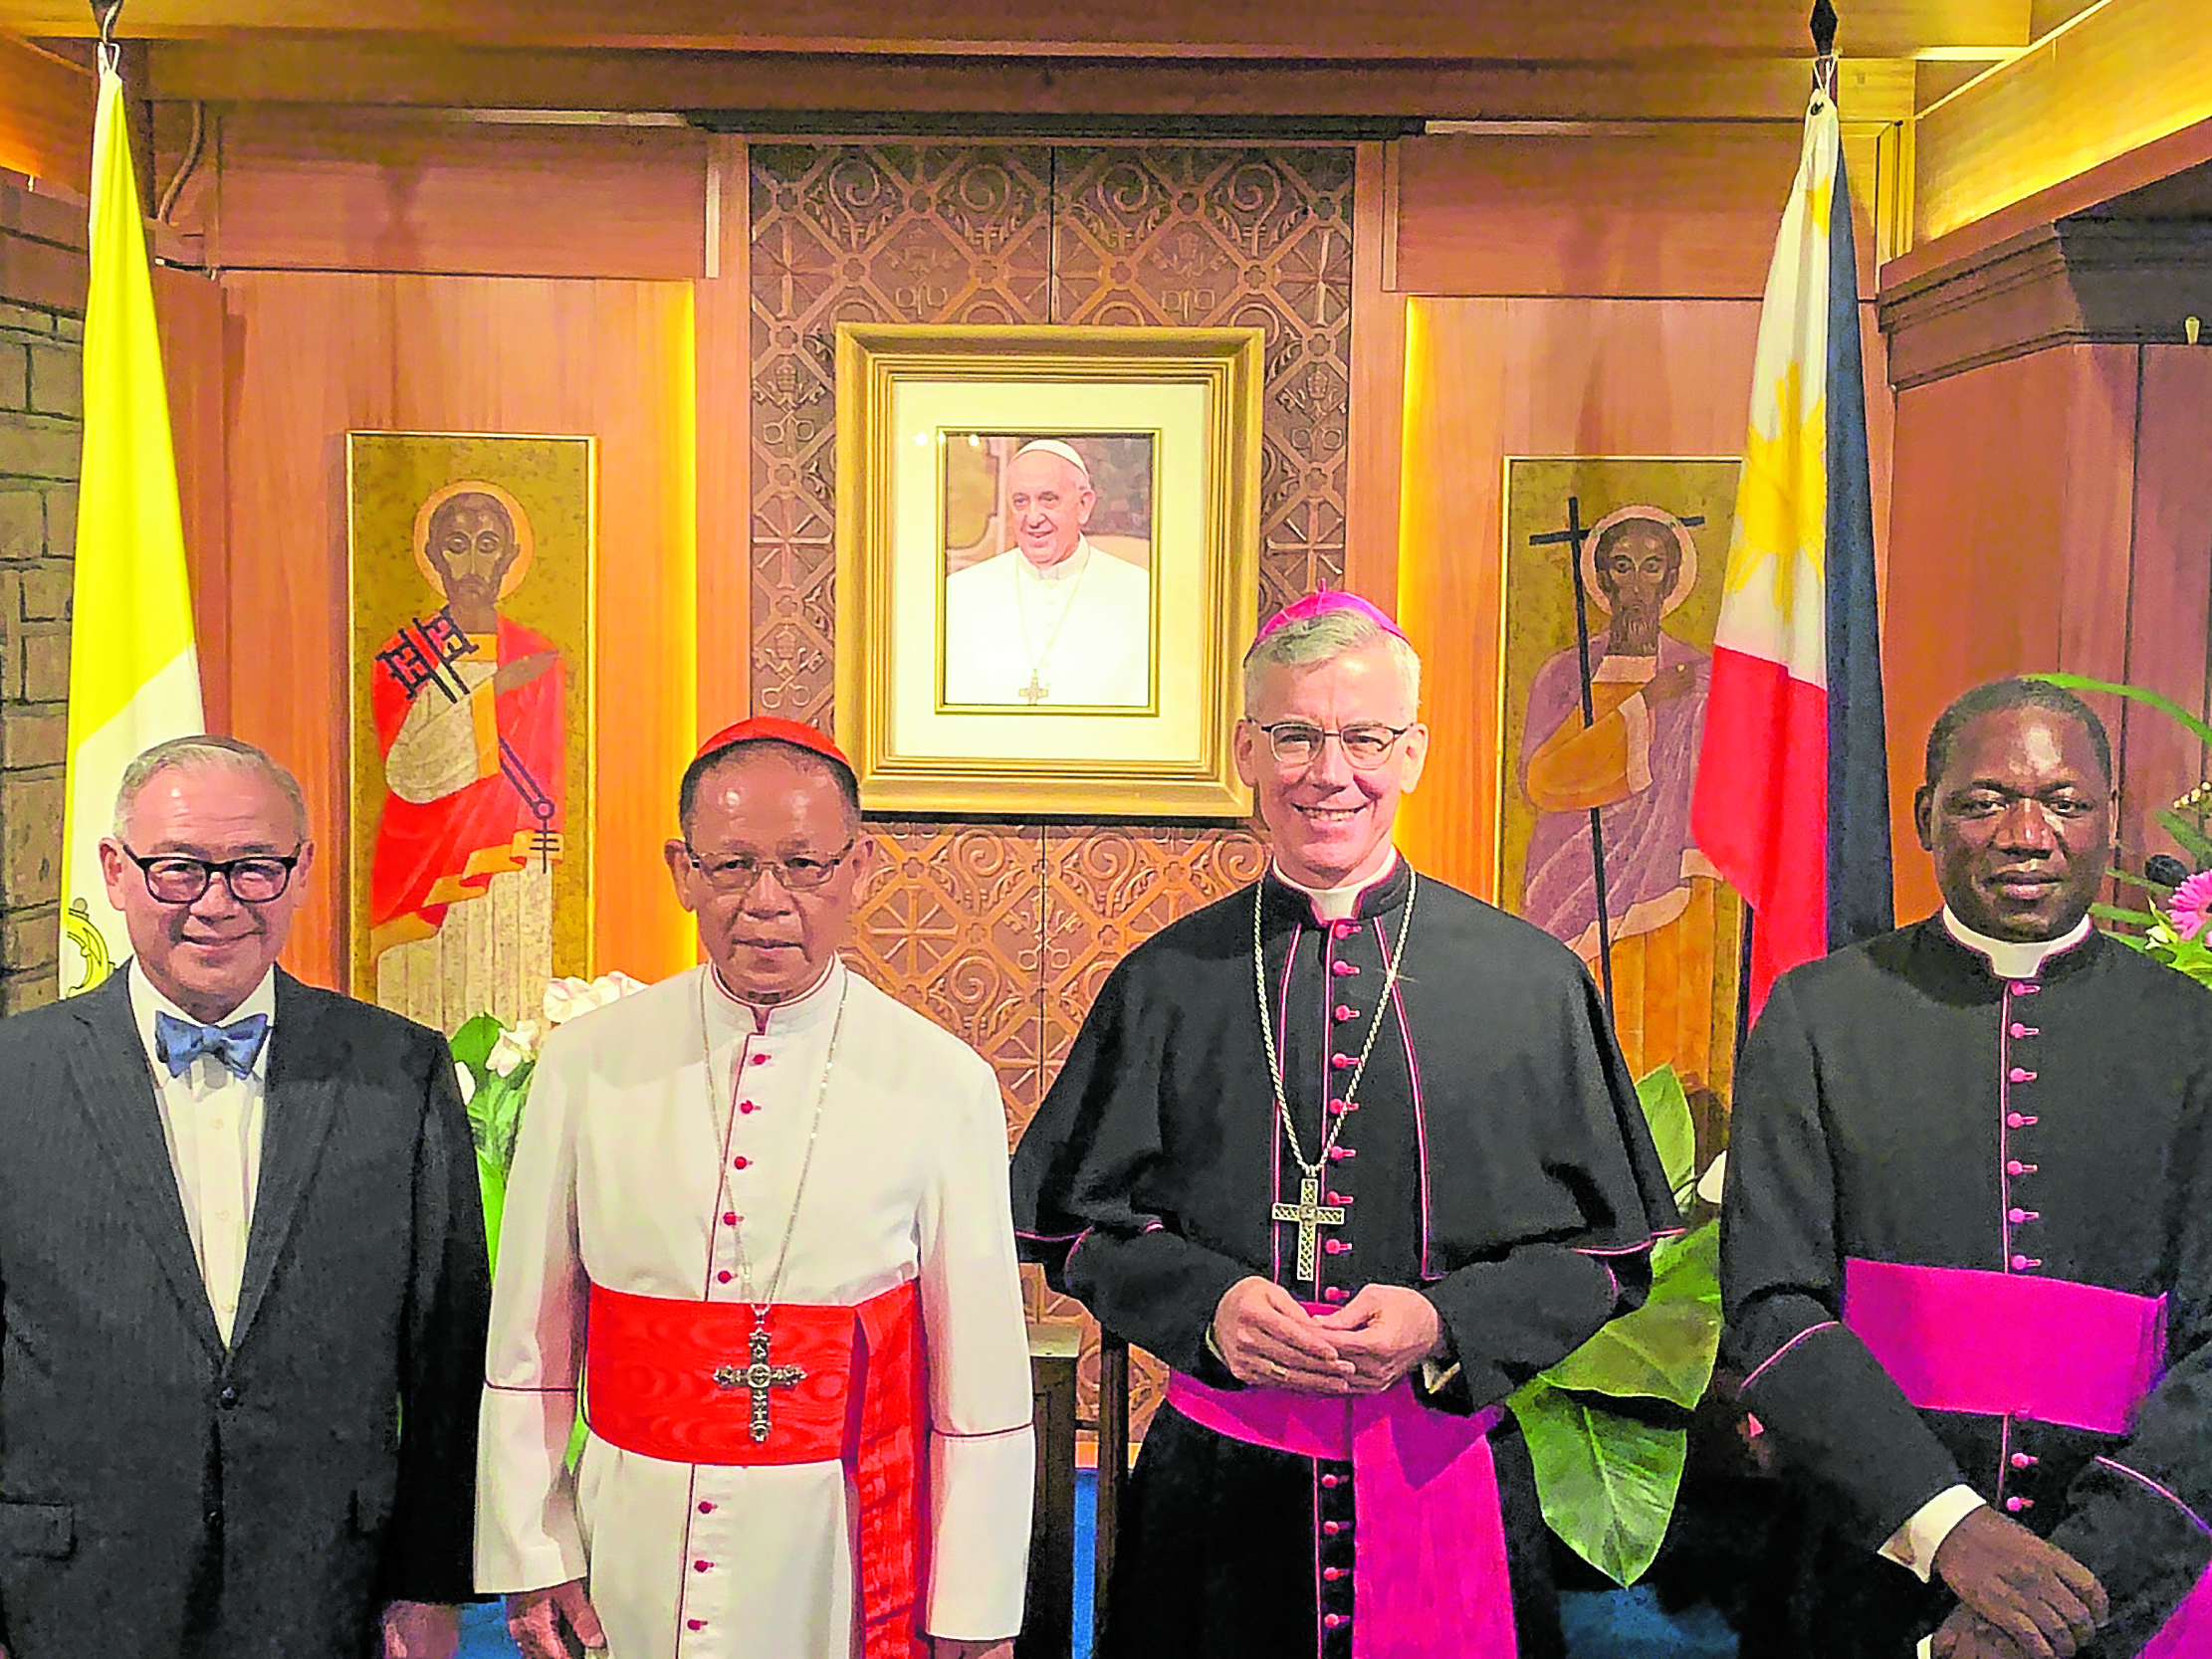 Foreign Secretary Teodoro Locsin Jr. (left), Cardinal Jose Advincula of the Archdiocese of Manila, Papal Nuncio Archbishop Charles John Brown and Nunciature Counselor Msgr. Julien Kabore